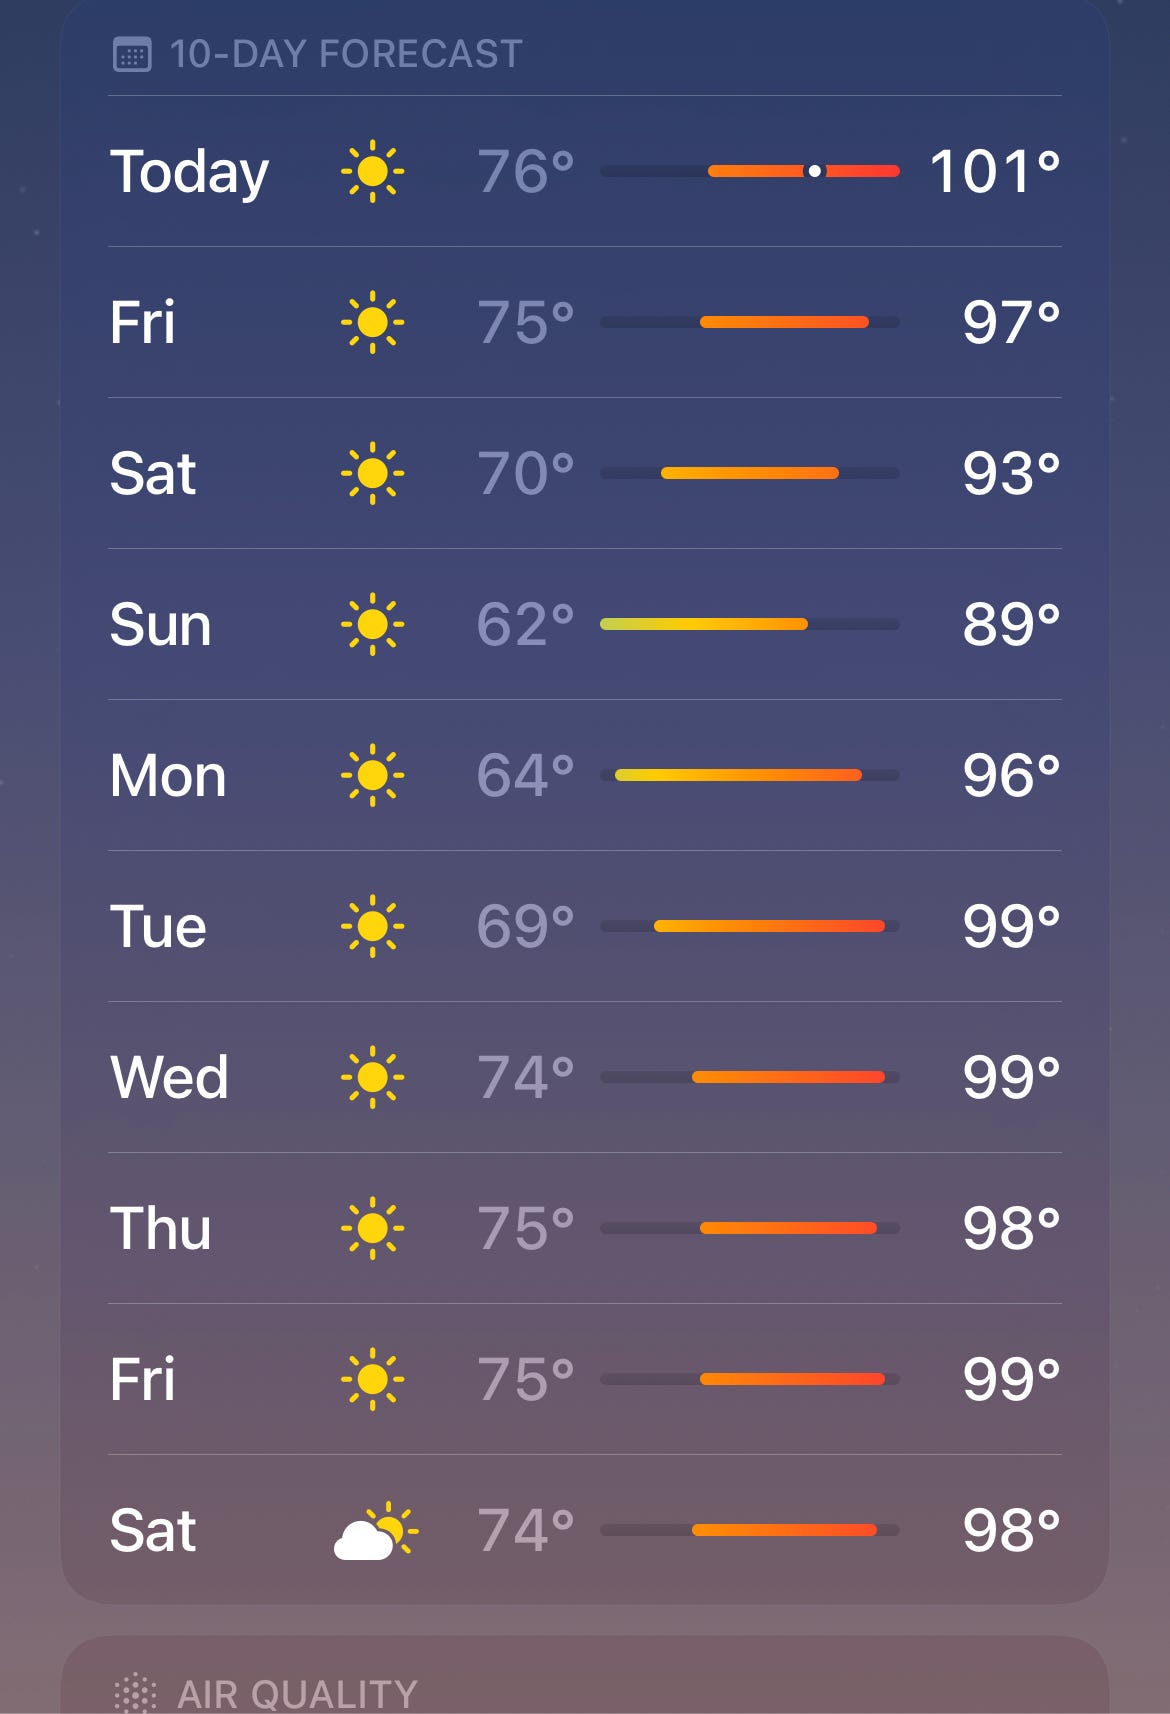 10 day forecast showing temperatures around 100 degrees